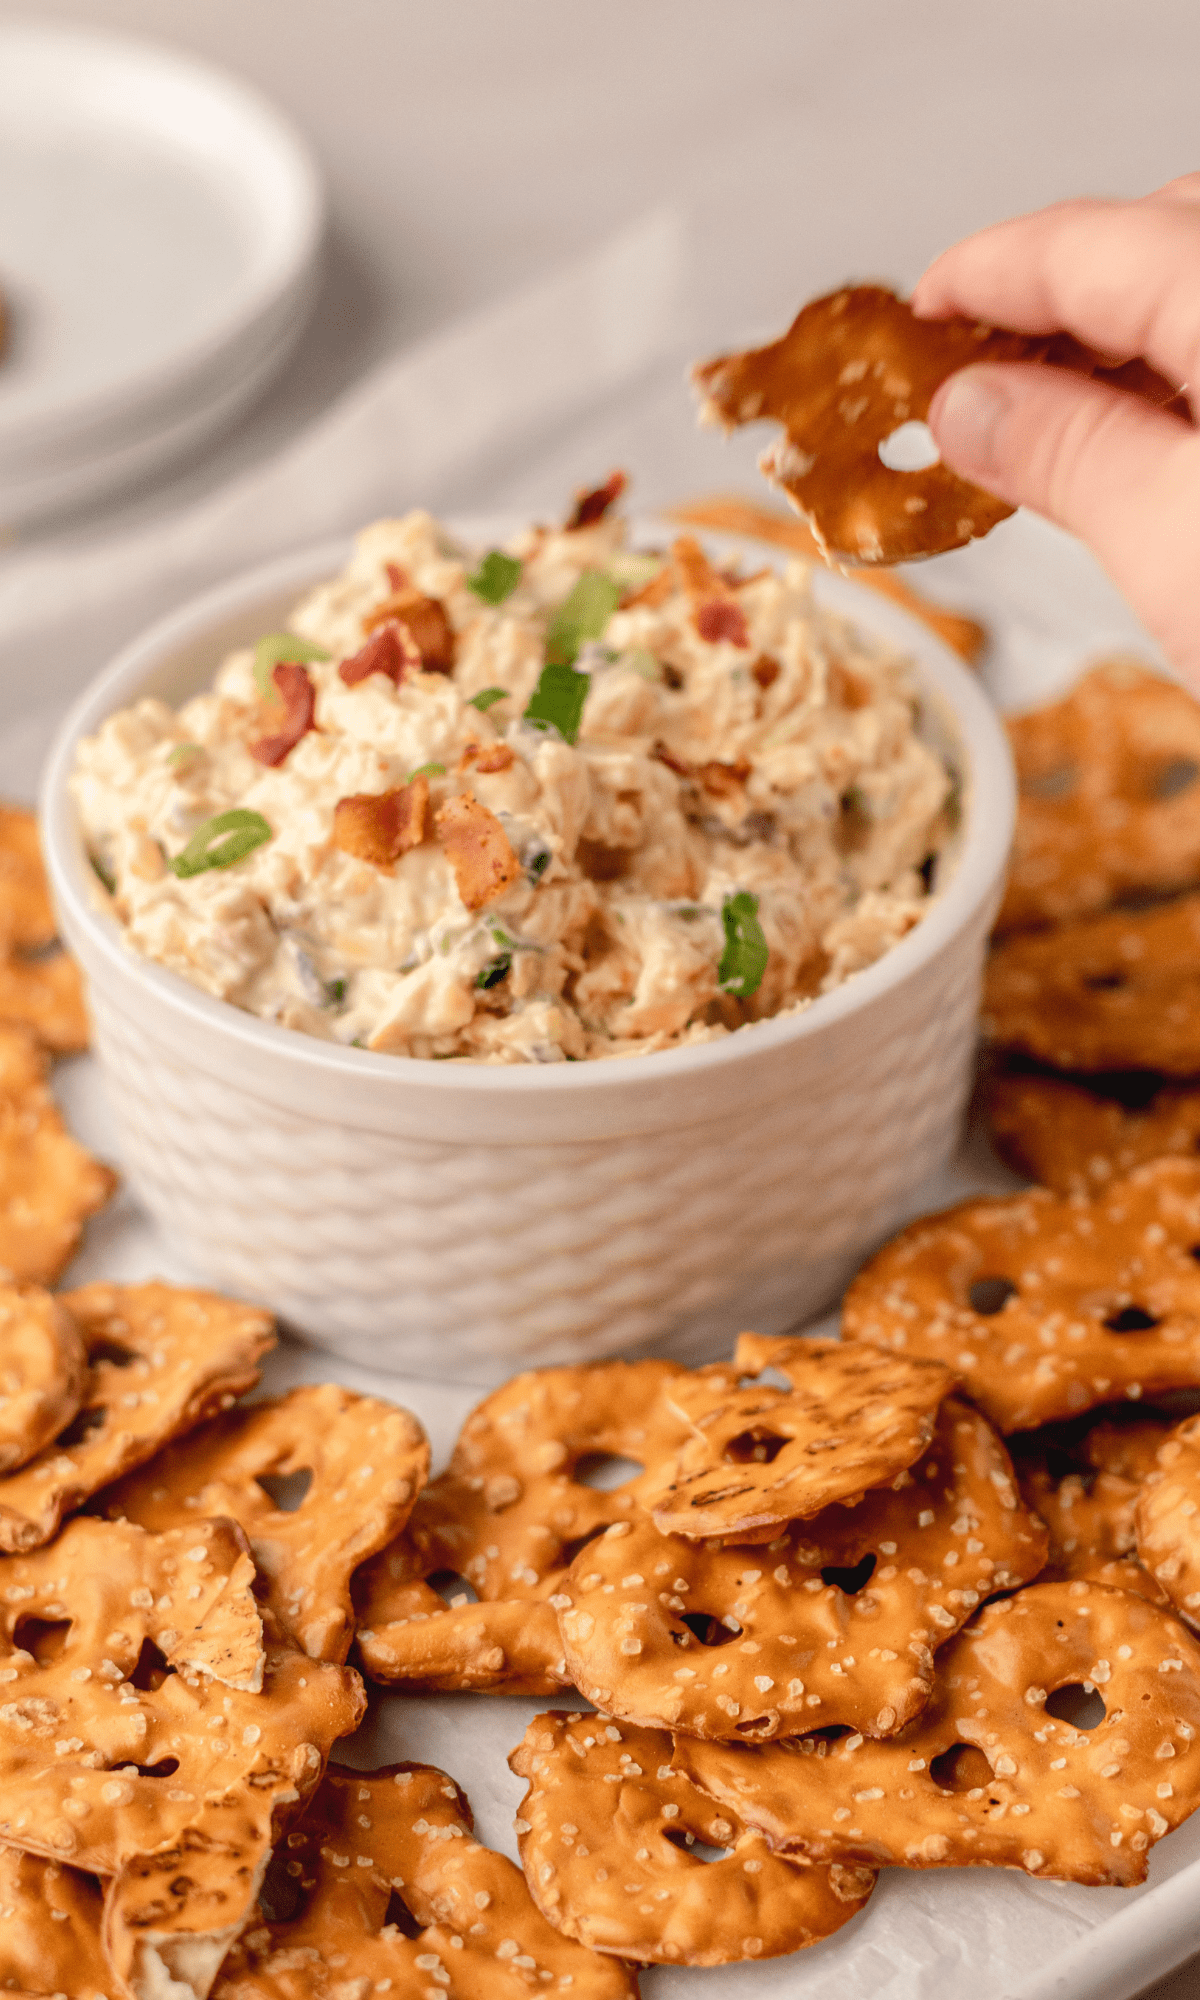 Pretzel Dip in a small white bowl surrounded by pretzel crisps and a tiny hand dipping a pretzel crisp in the dip.